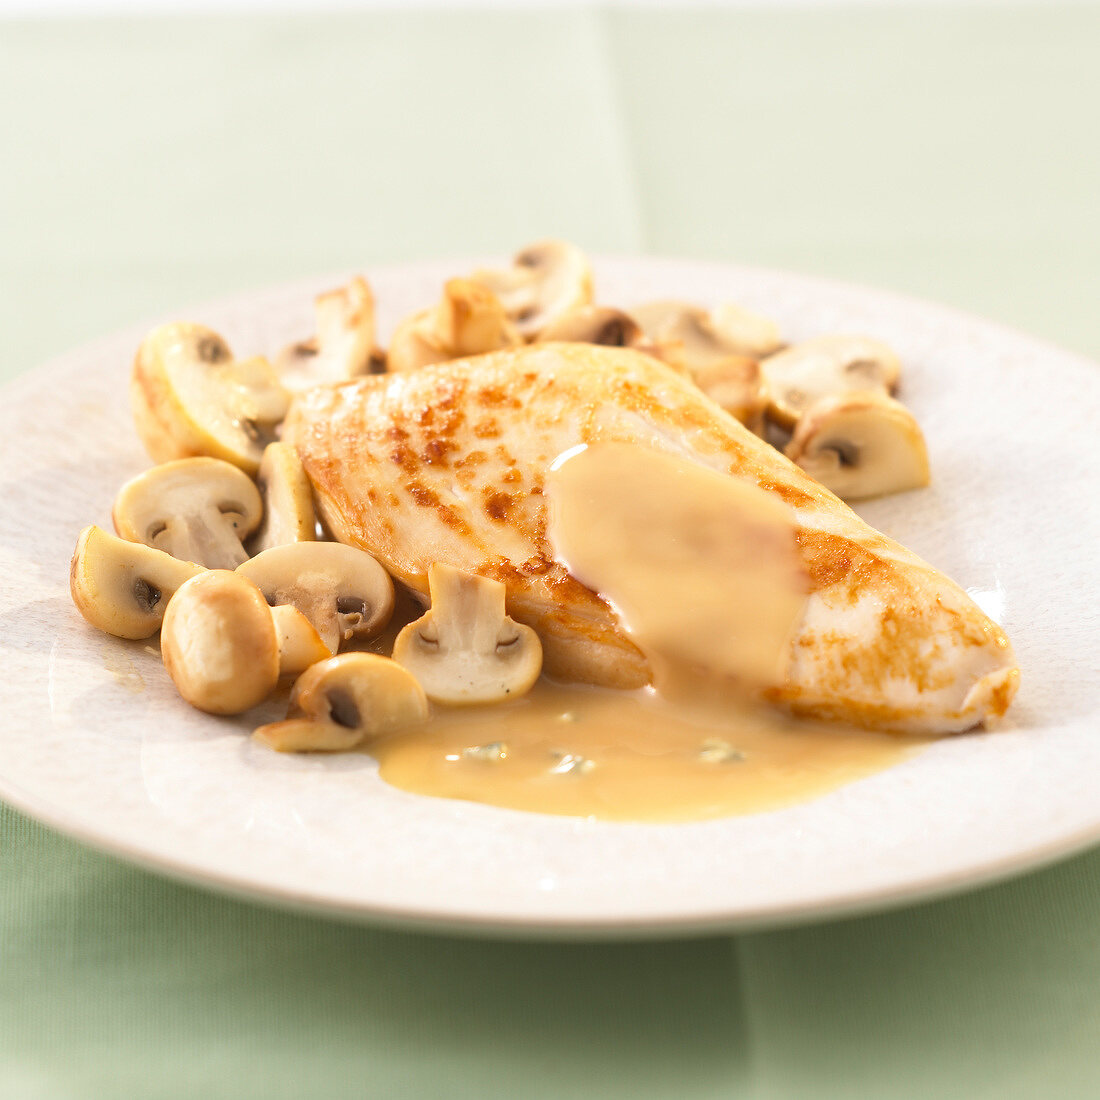 Chicken escalope with button mushrooms and creamy sauce